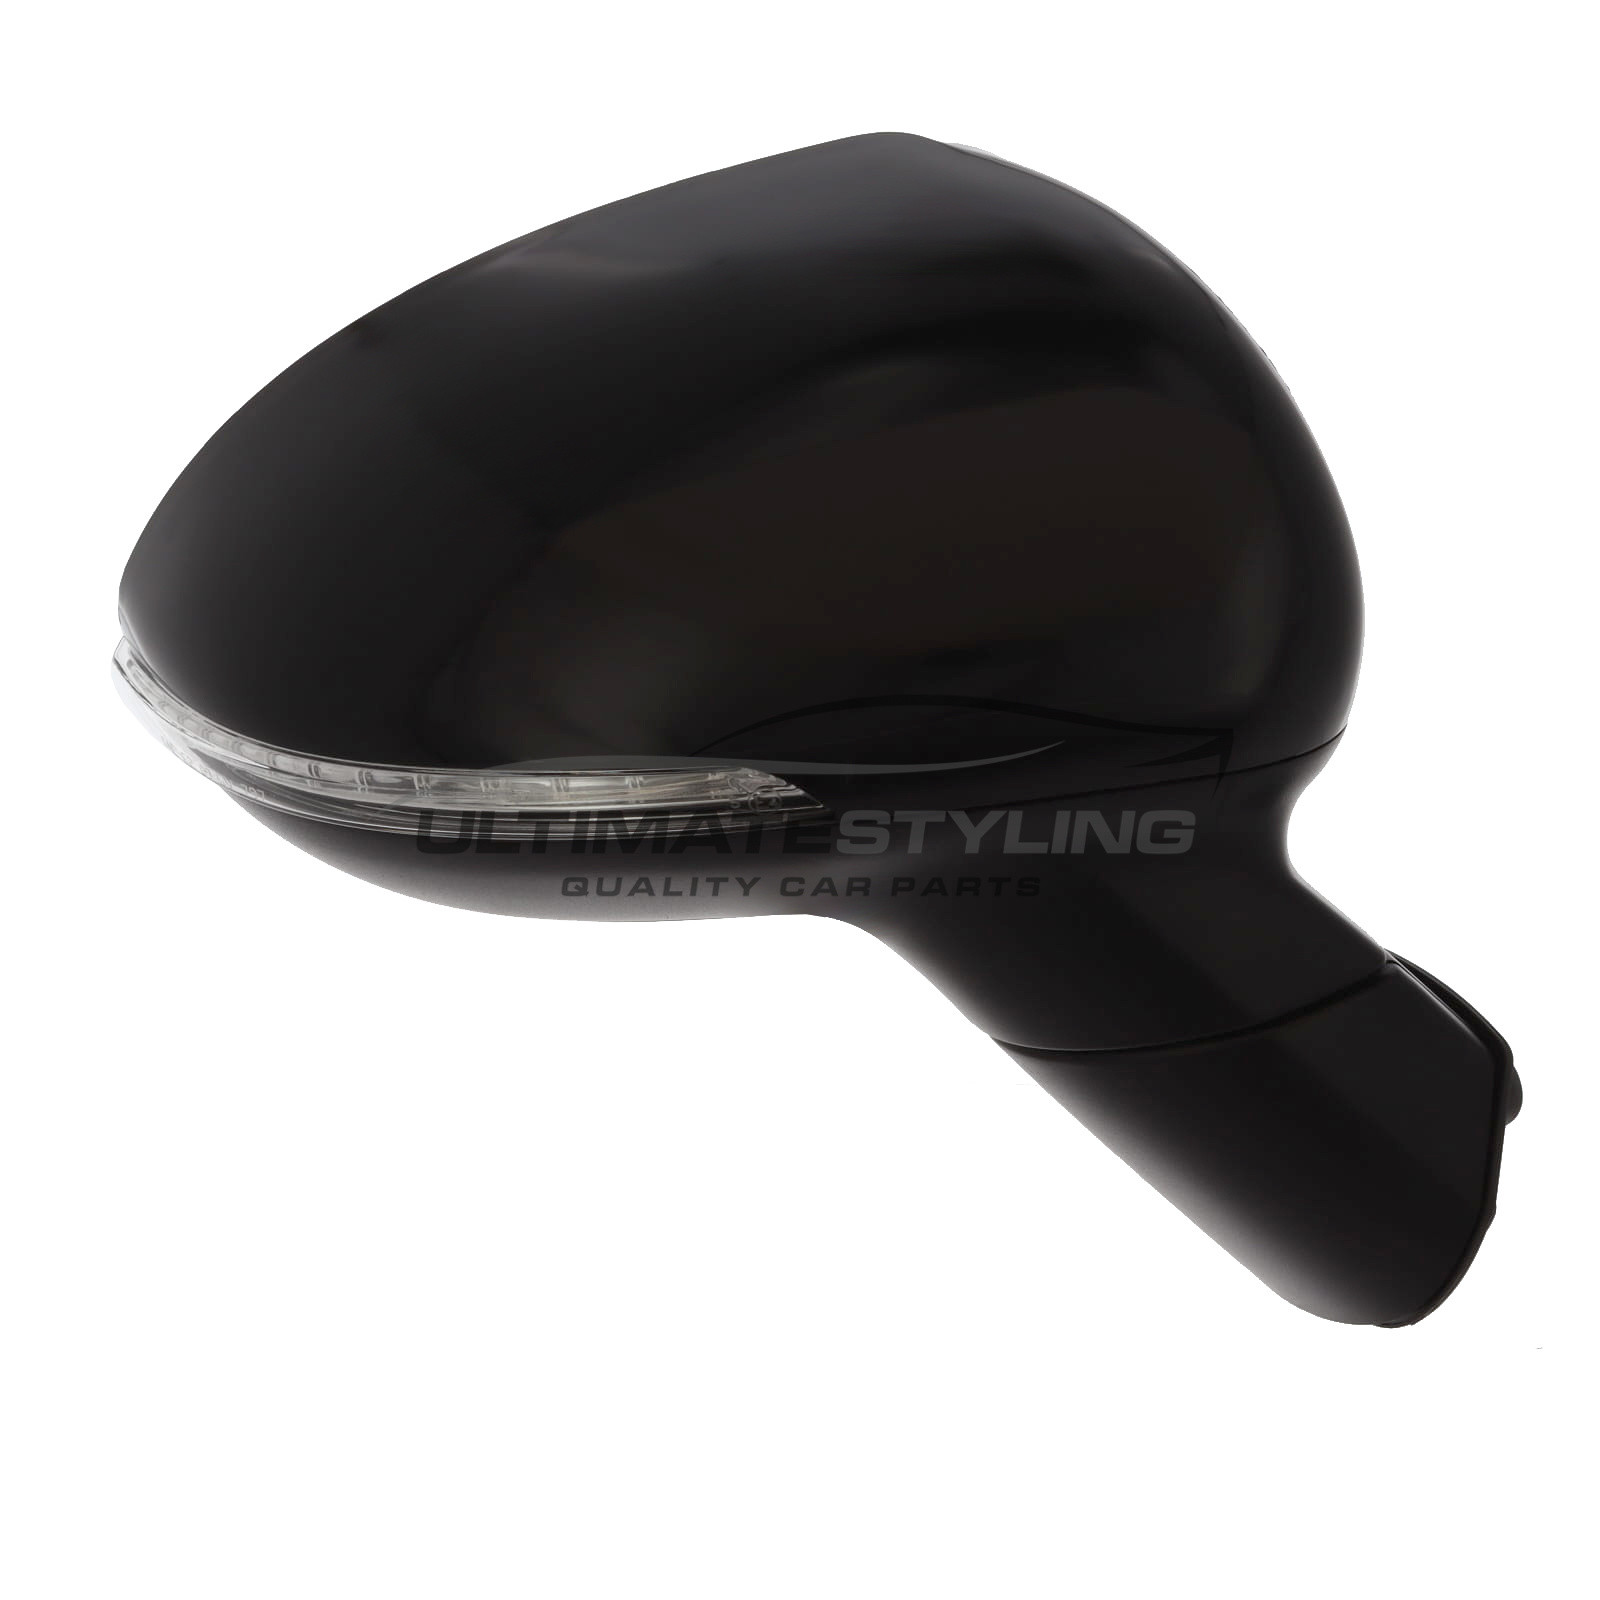 Kia Rio Wing Mirror / Door Mirror - Drivers Side (RH) - Electric adjustment - Heated Glass - Power Folding - Indicator - Paintable - Black Cover